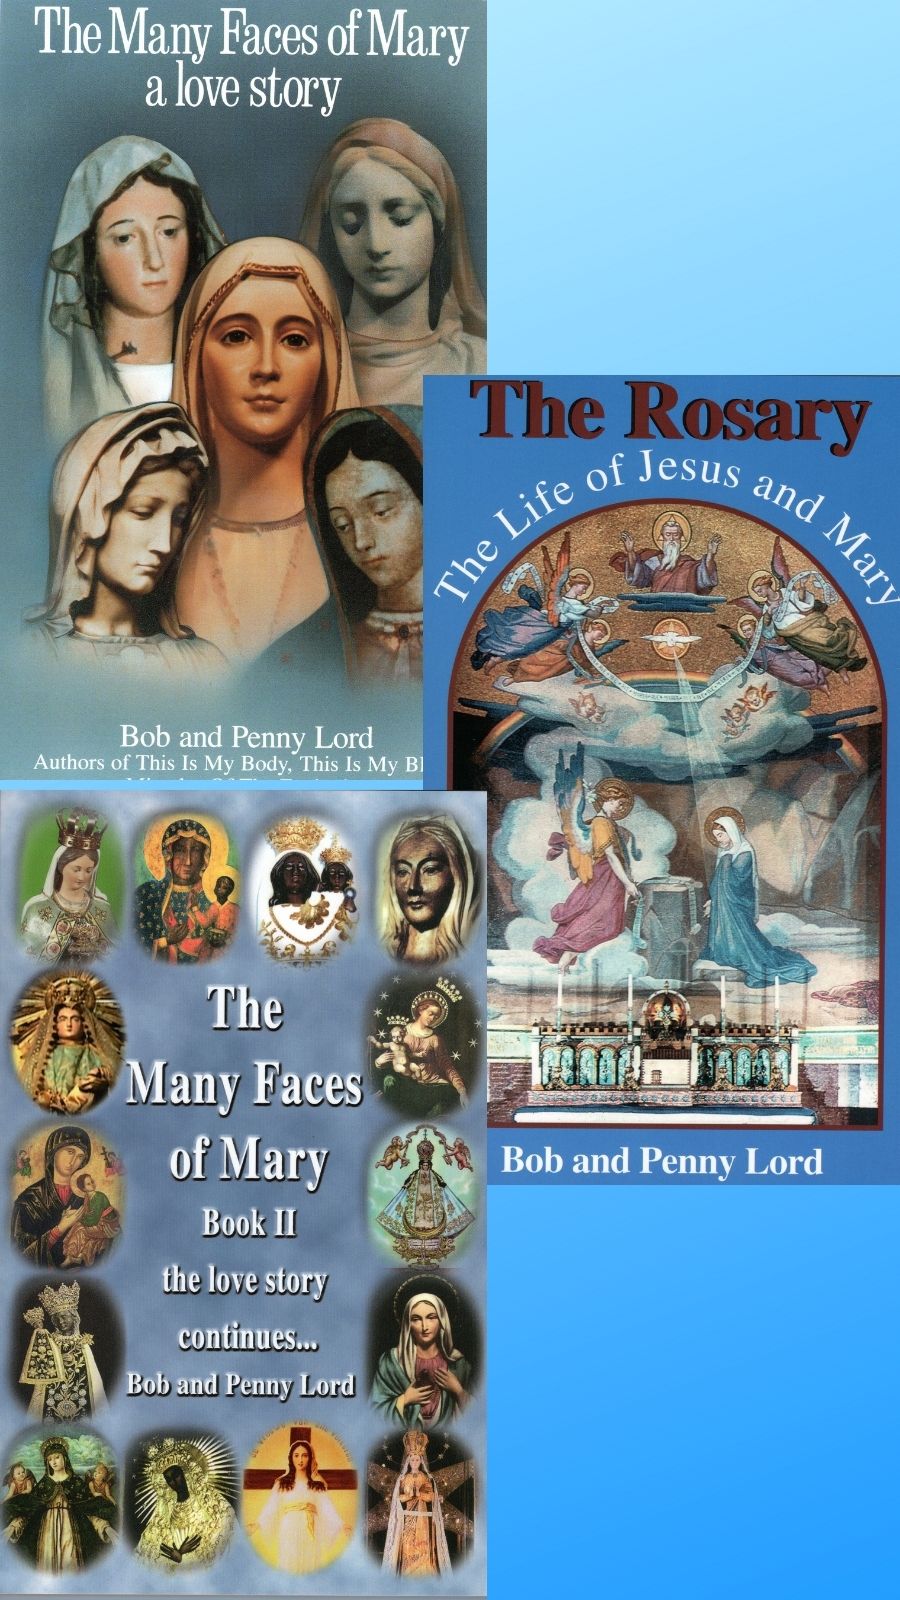 Many Faces of Mary Books 1 and 2 and The Rosary, The LIfe of Jesus and Mary  Books - Bob and Penny Lord